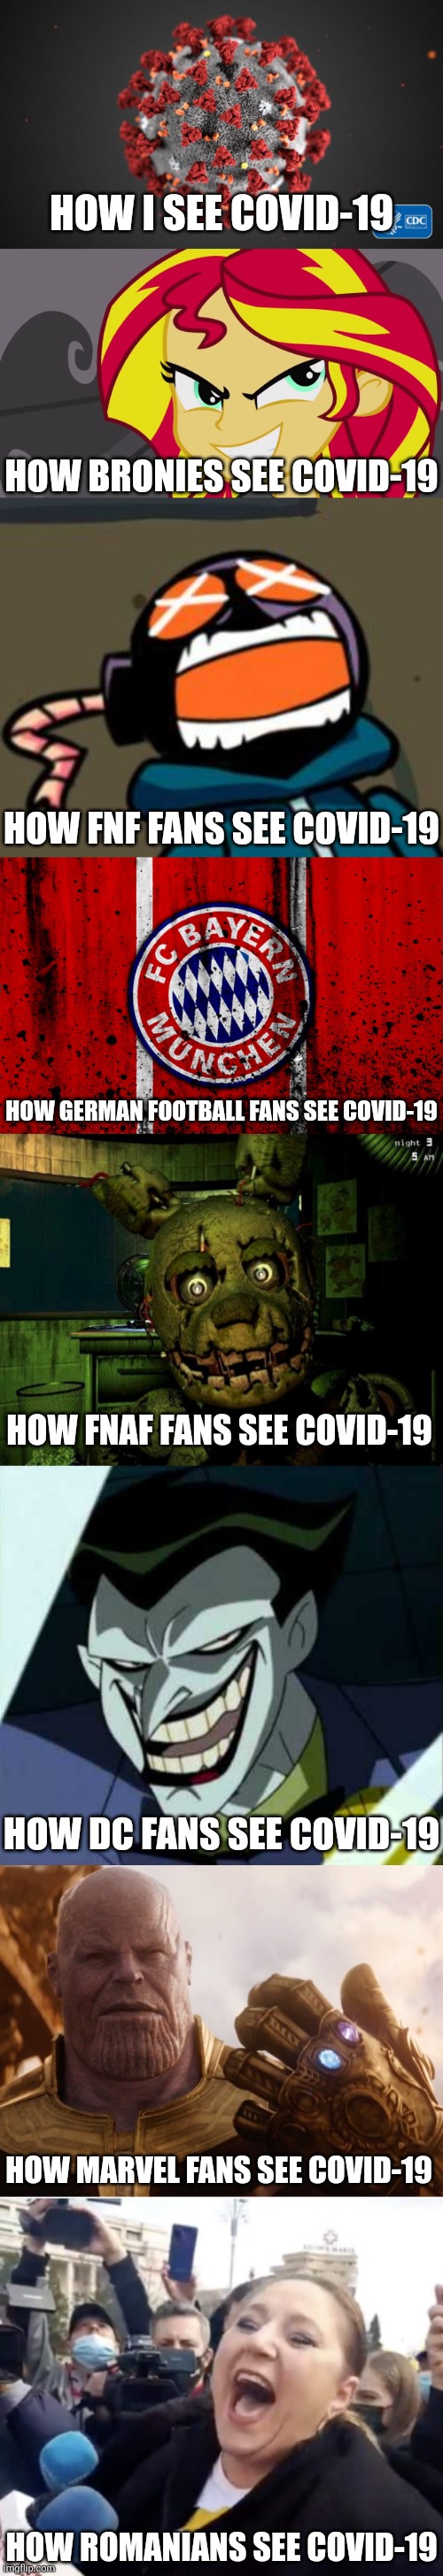 Oh god, WHY?! | HOW I SEE COVID-19; HOW BRONIES SEE COVID-19; HOW FNF FANS SEE COVID-19; HOW GERMAN FOOTBALL FANS SEE COVID-19; HOW FNAF FANS SEE COVID-19; HOW DC FANS SEE COVID-19; HOW MARVEL FANS SEE COVID-19; HOW ROMANIANS SEE COVID-19 | image tagged in covid-19,coronavirus,memes | made w/ Imgflip meme maker